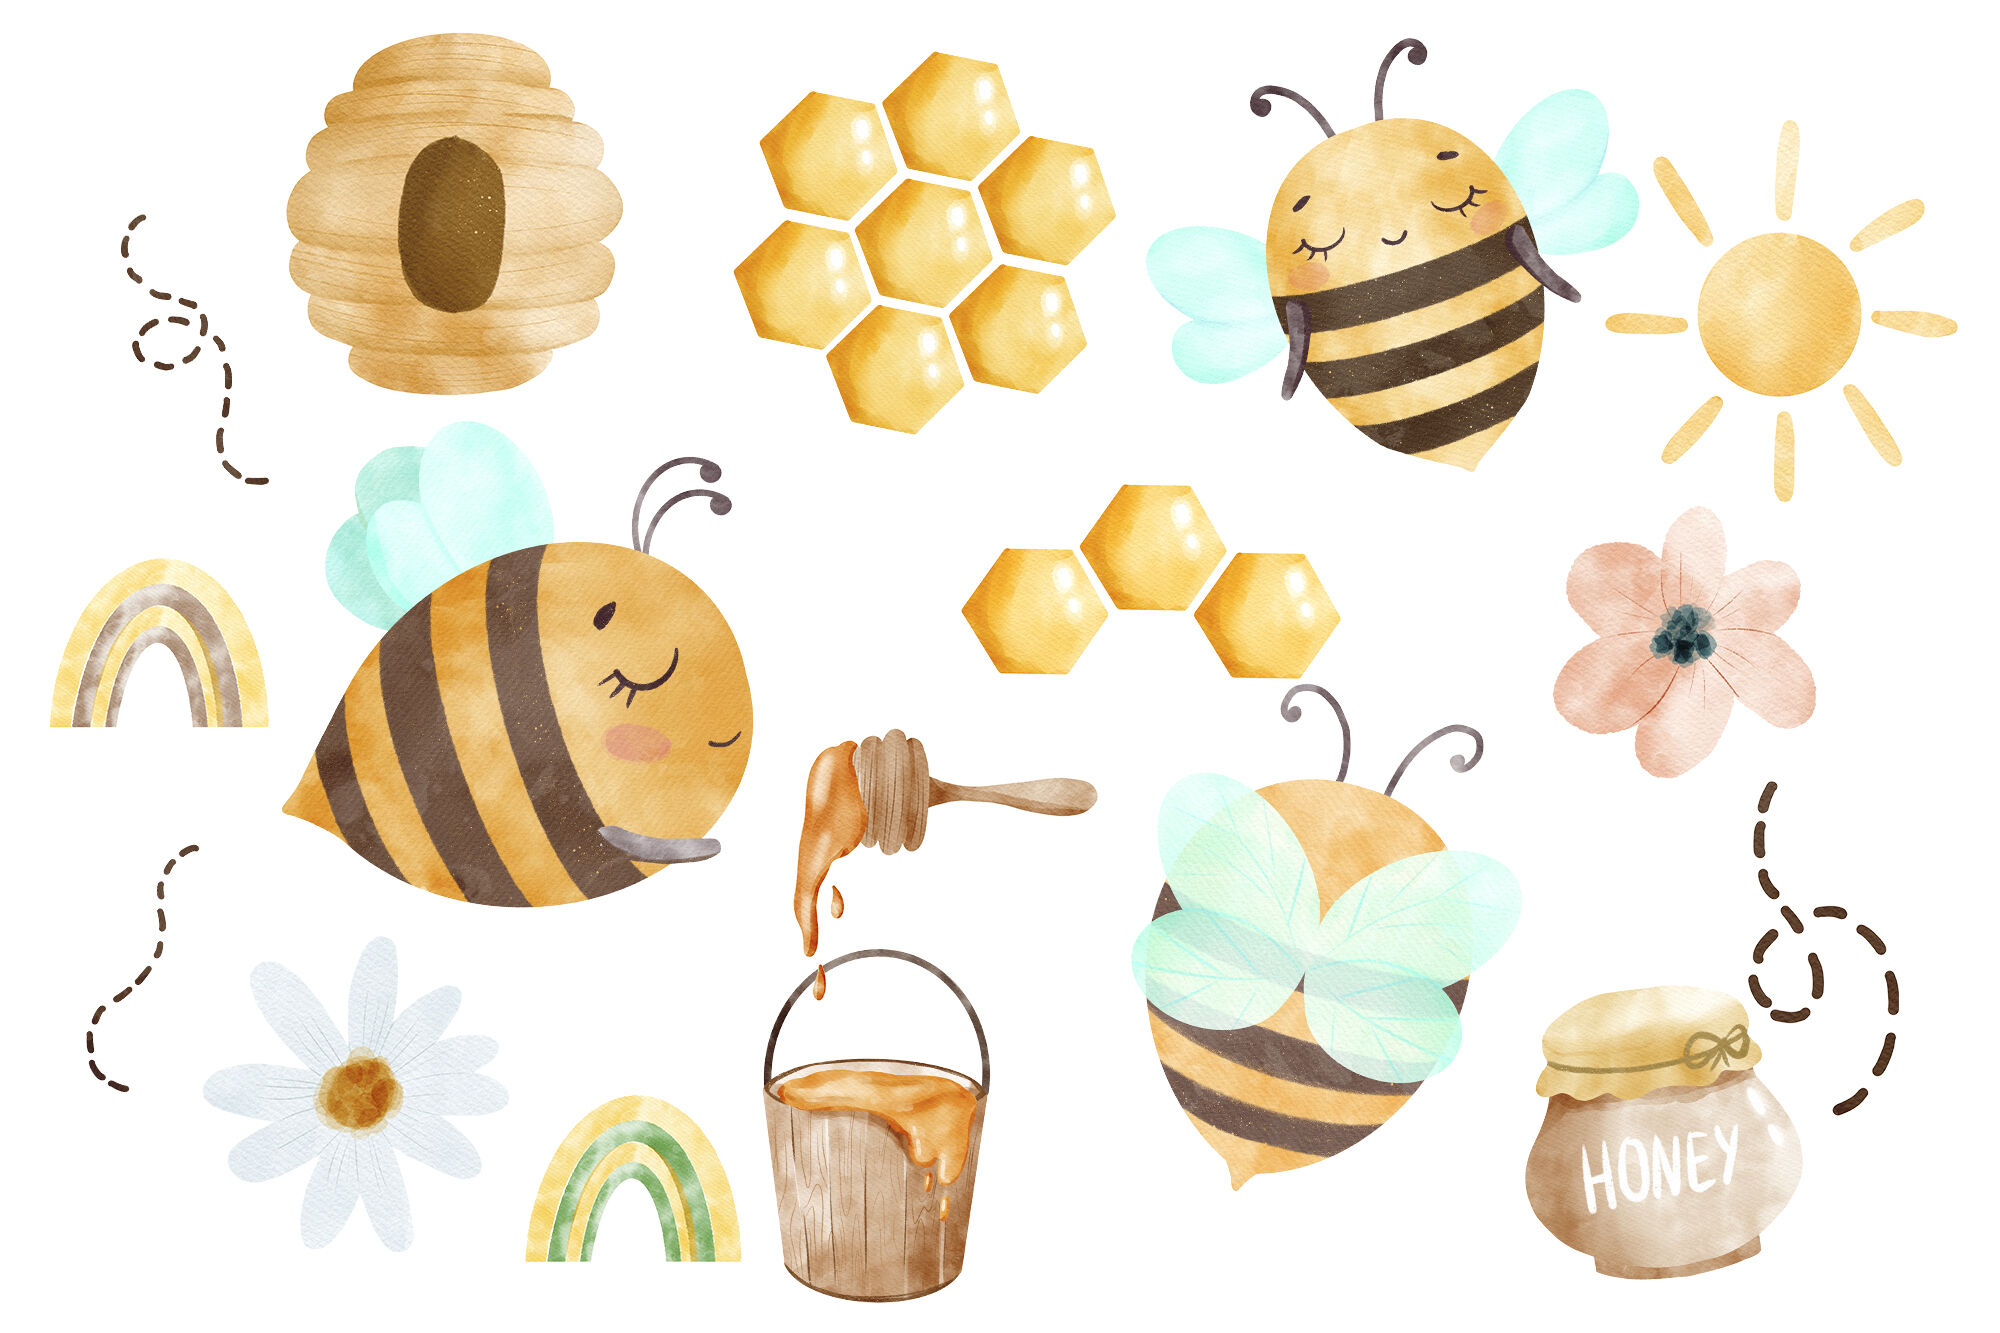 Watercolor Honey Bee Farmhouse Decor Png Graphic by